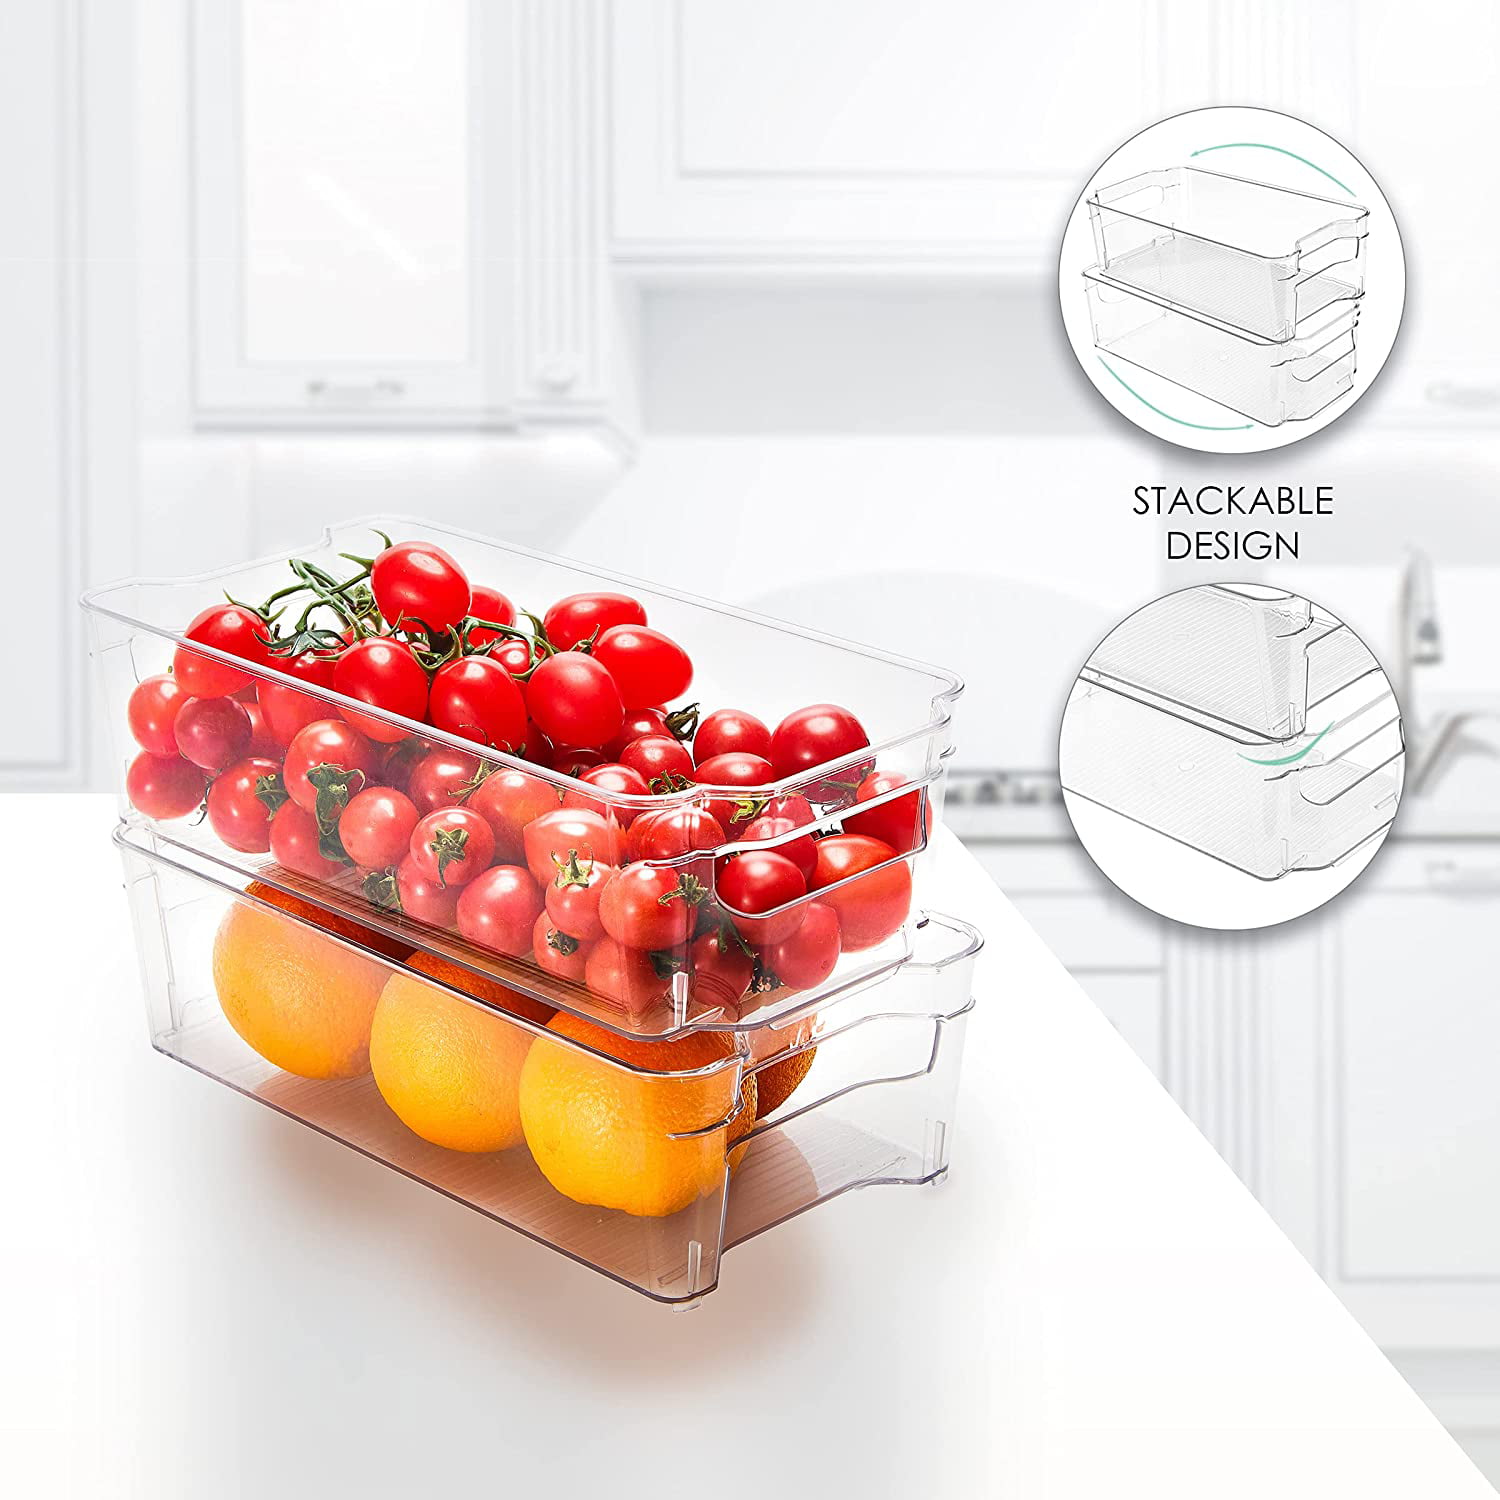 2 PCS Refrigerator Organizer Bins Narrow Stackable Fridge Organizers for Freezer Kitchen Pantry Countertops Cabinets Clear Plastic Storage Containers JINAMART Set of 2 